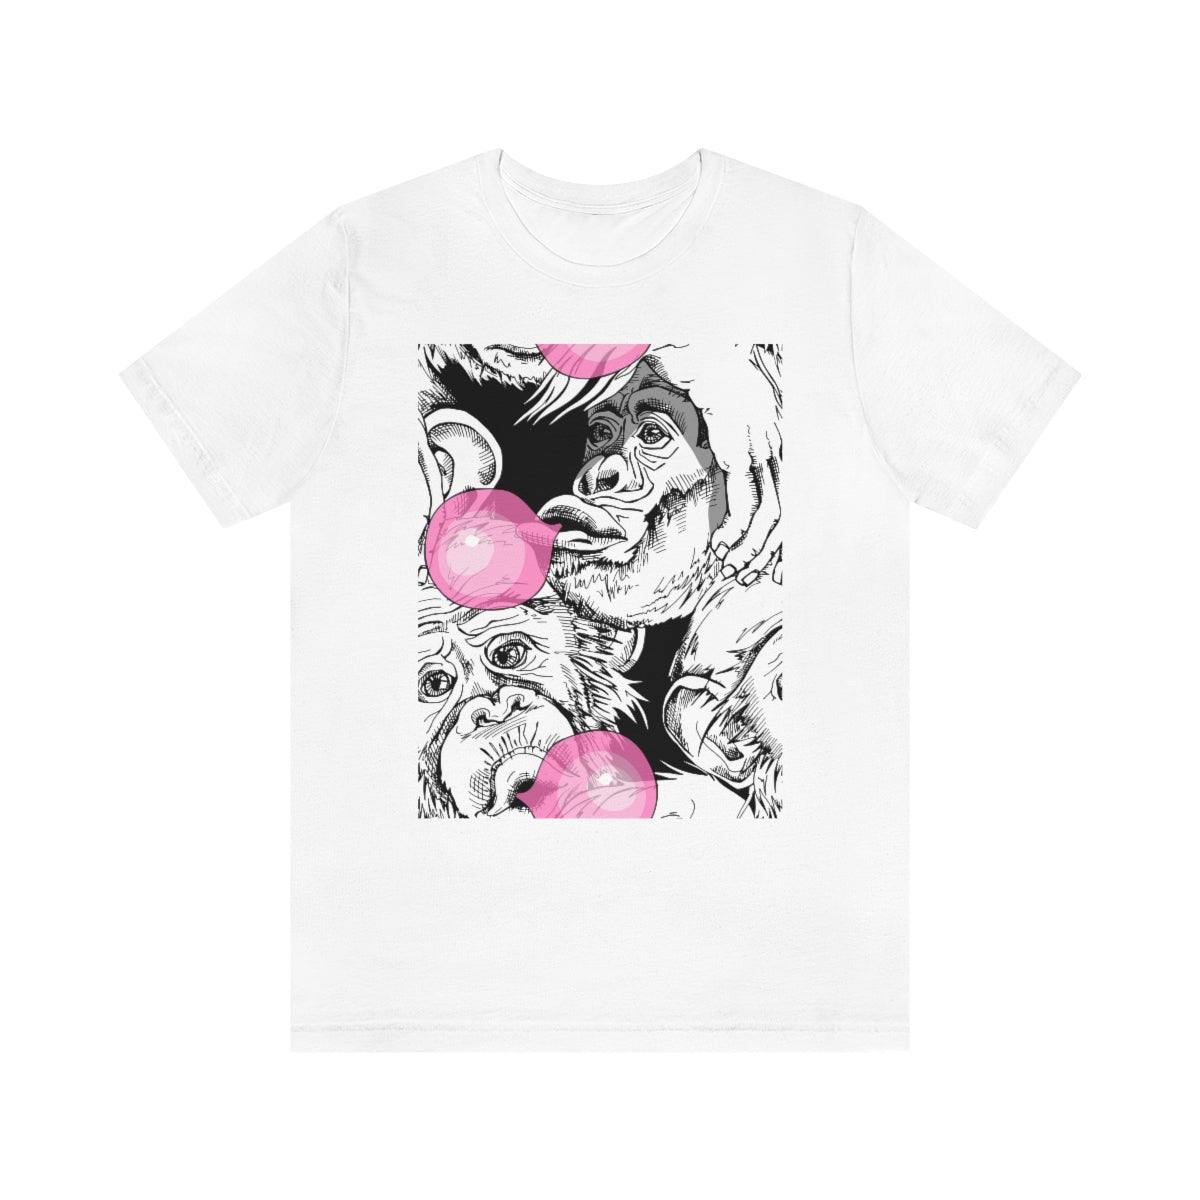 Unisex Jersey Short Sleeve Tee "Funny Monkey with a pink bubble gum"